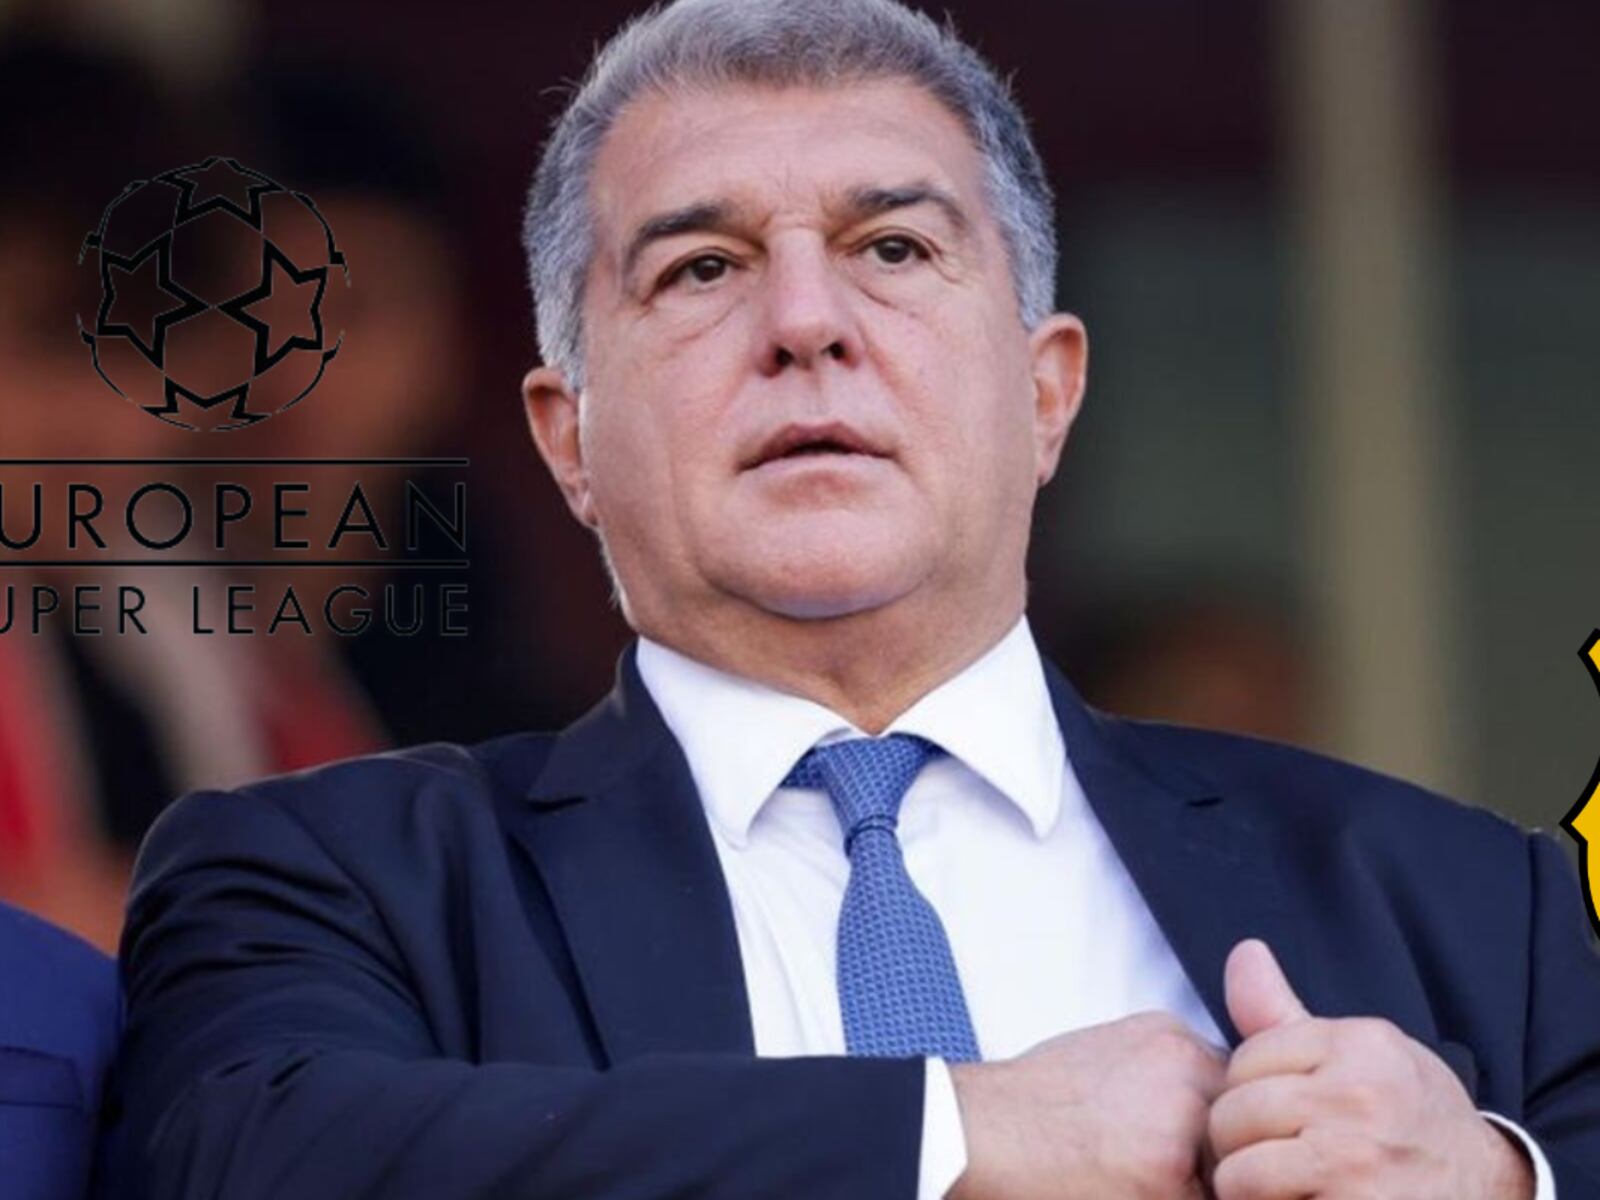 Besides Real Madrid and Barcelona, ​​Laporta confirms teams for the Super League